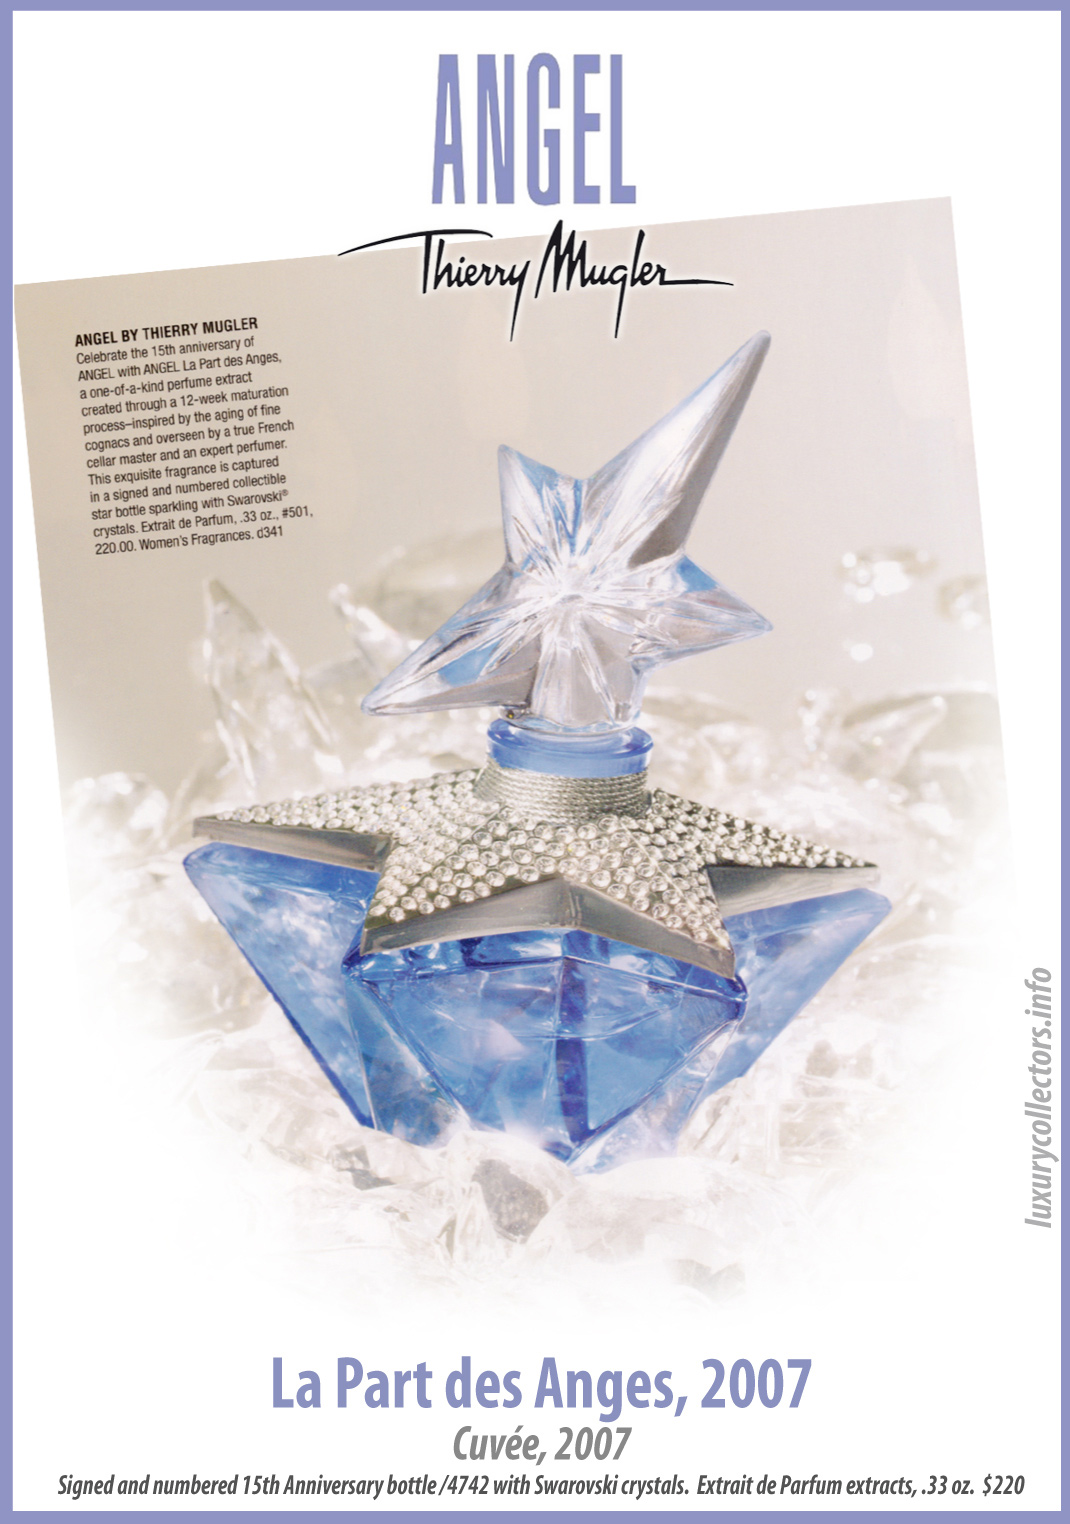 Thierry Mugler Angel Perfume La PArt des anges Angels (Etoile), 2007. Perfume Bottle Collecting 15th anniversary